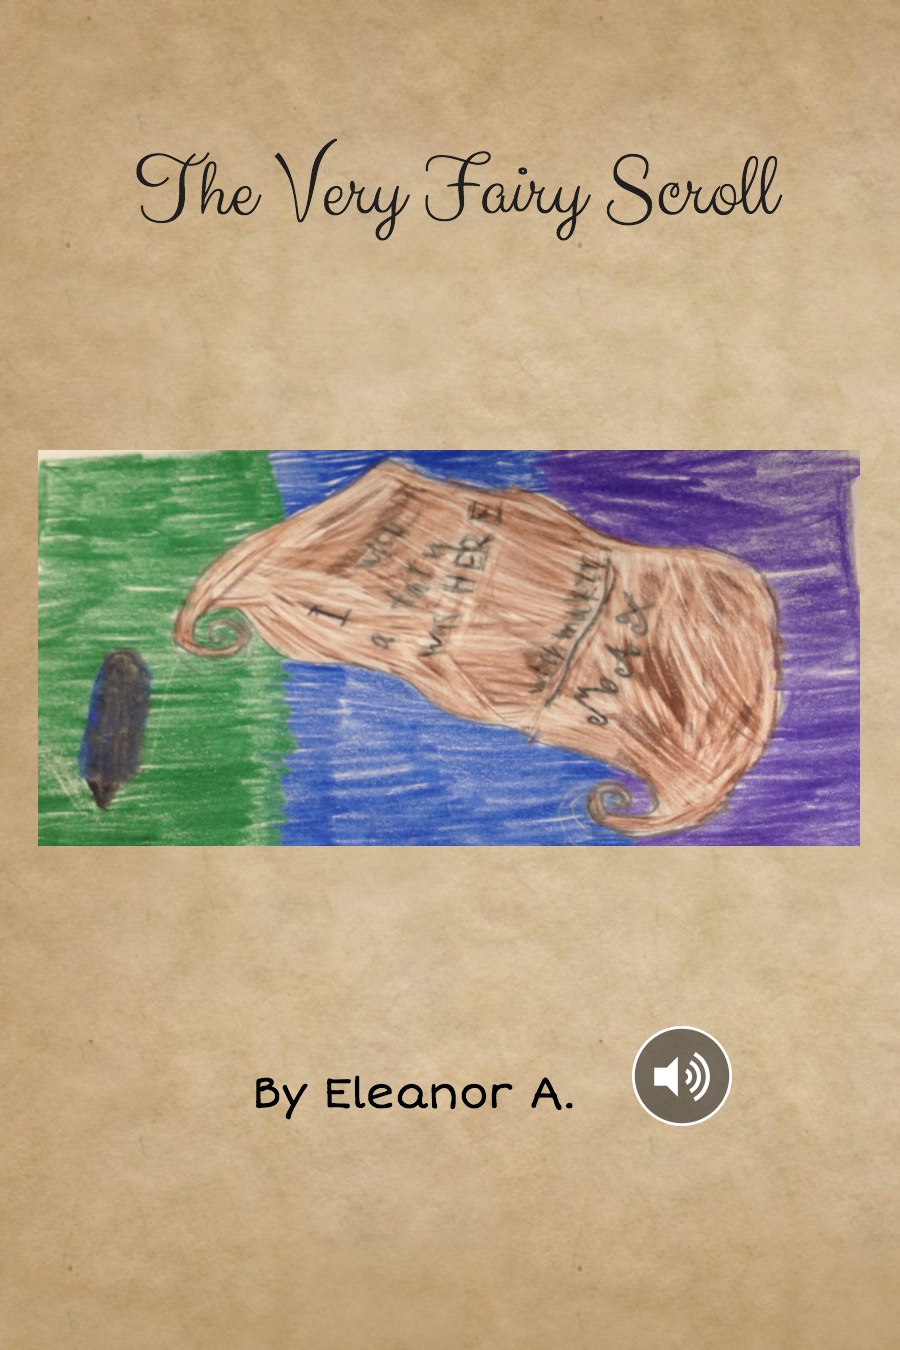 The Very Fairy Scroll by Eleanor A